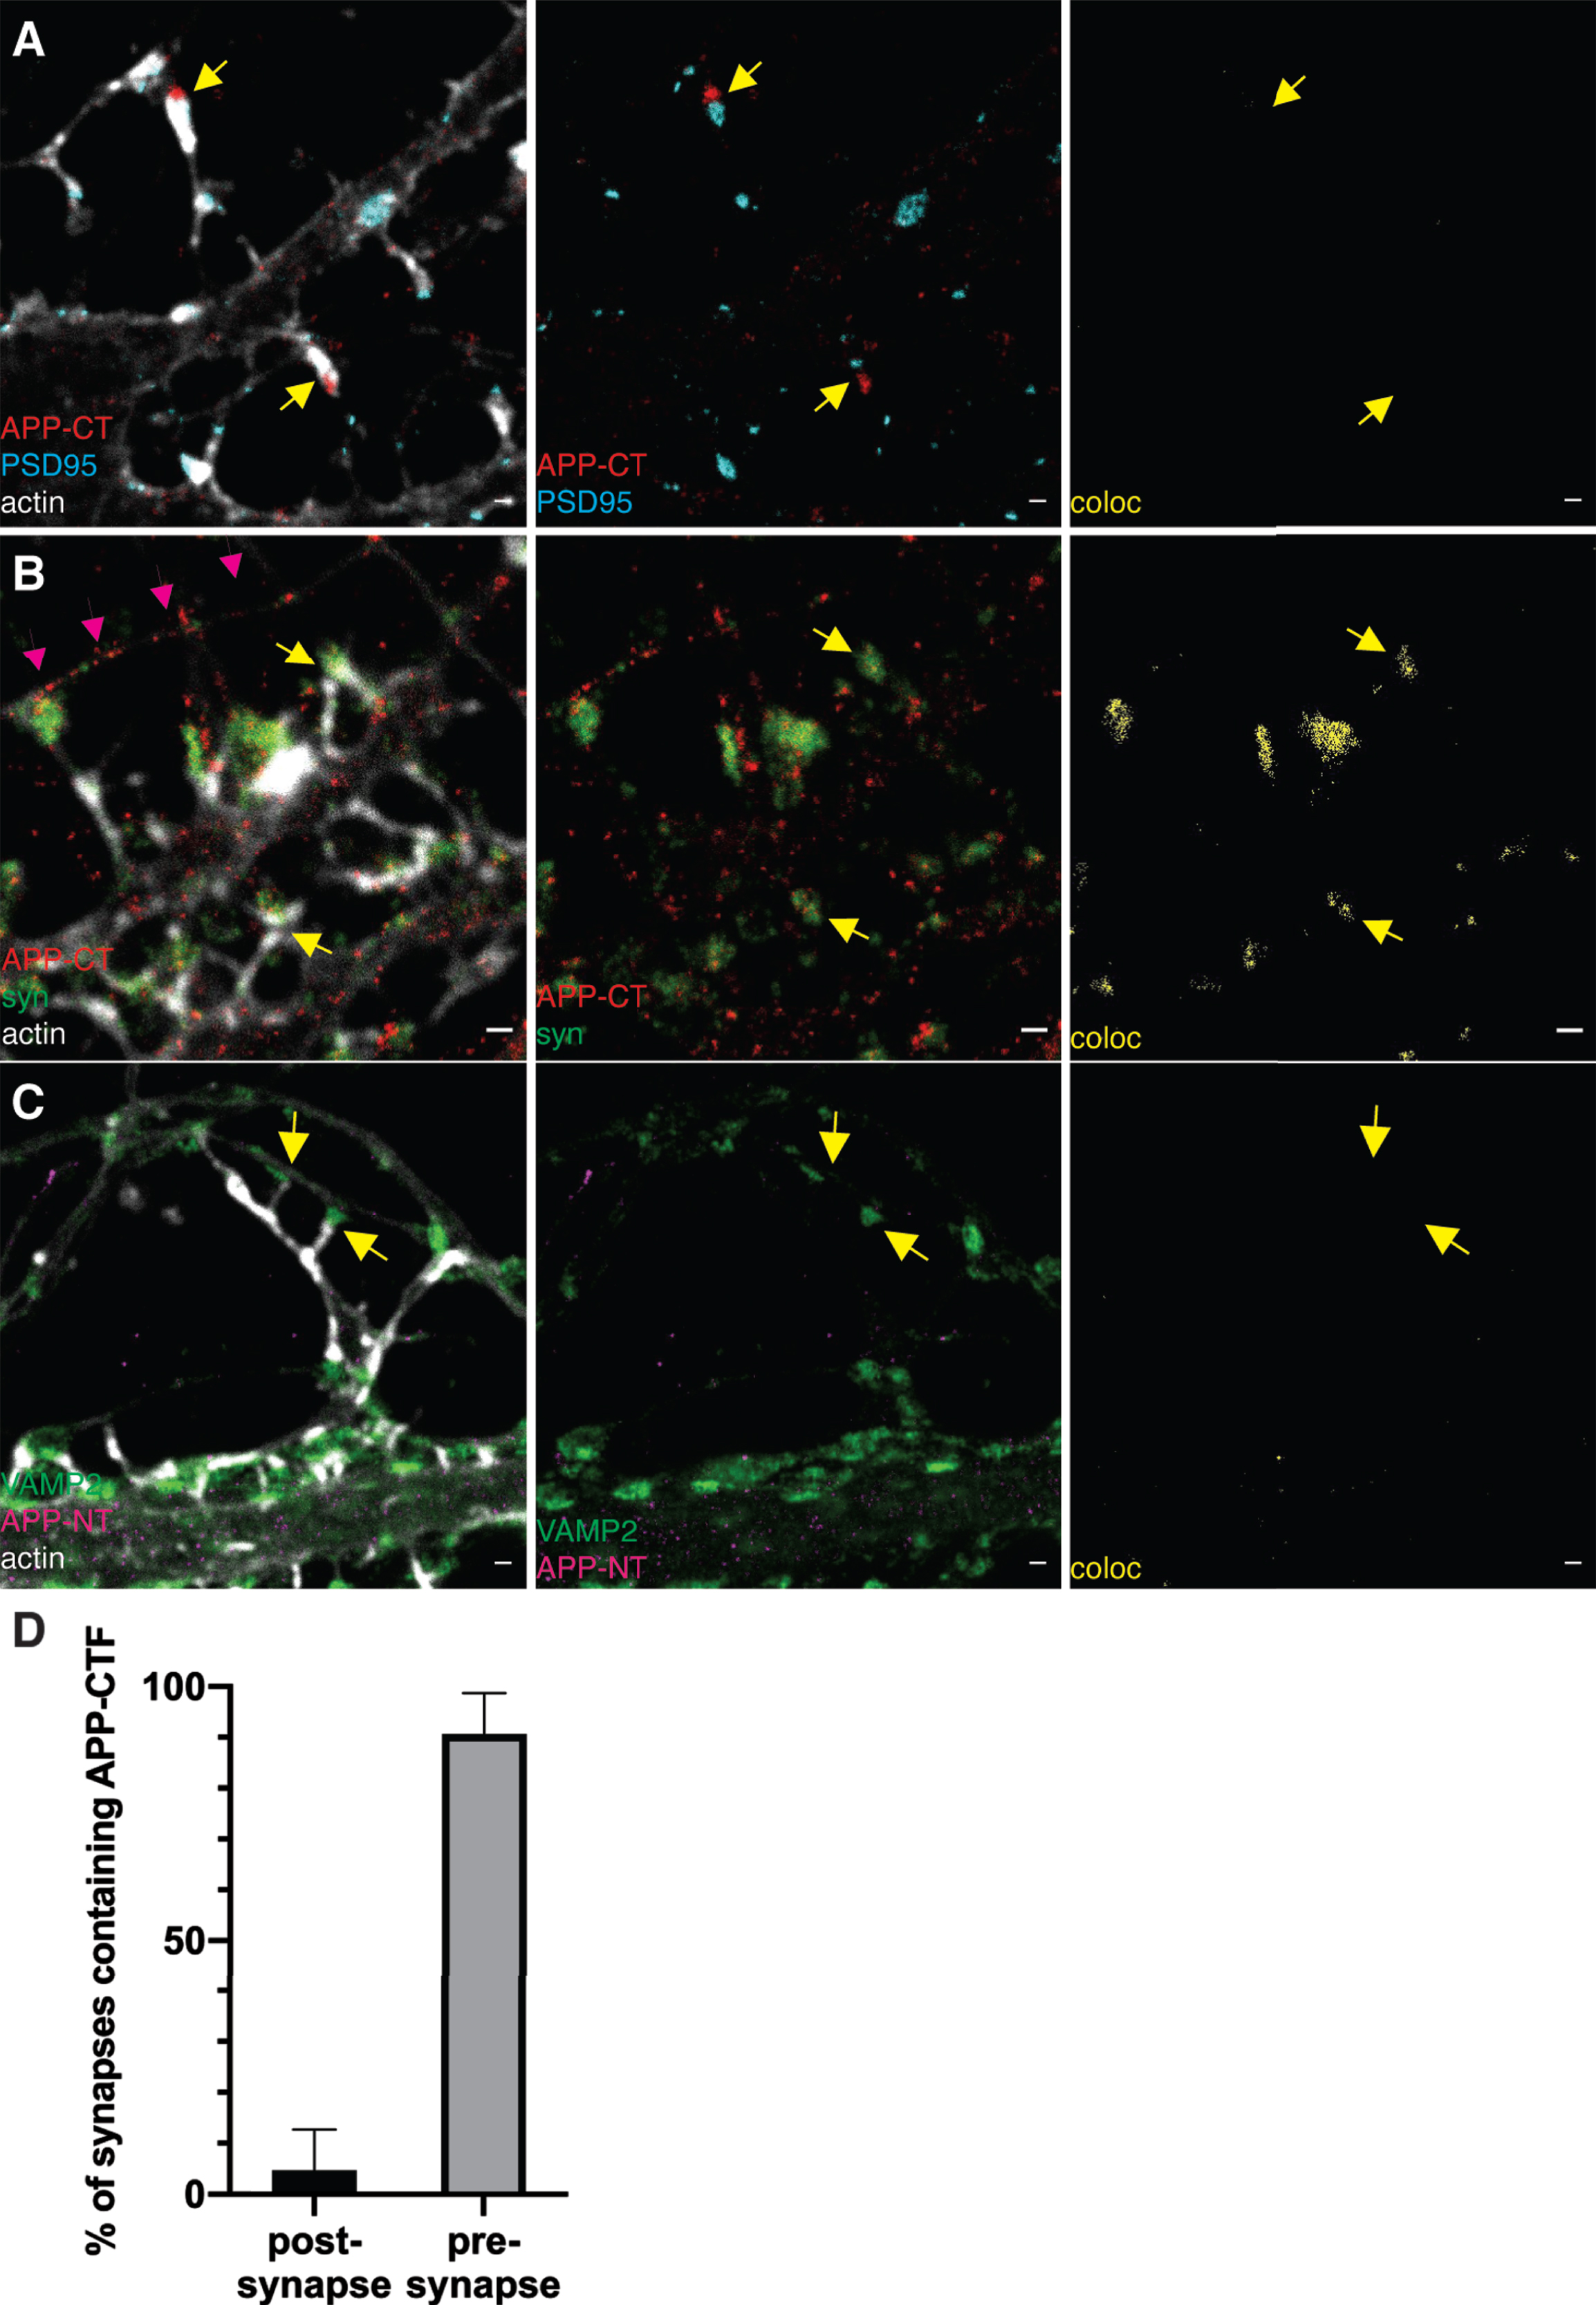 STED images of APP-CTF and synaptic markers in neurites. Immunolabeling and 2-channel STED imaging was used to visualize APP-CTF and synaptic markers in neurites of hippocampal neurons. A third, confocal, channel was used to image the actin cytoskeleton (phalloidin staining). Scale bar for all pictures: 500 nm. A) APP-CT (red), PSD95 (cyan) and actin in a confocal channel (white). Synapses showing PSD95 at the postsynaptic spines and APP-CT at the presynaptic side are marked with yellow arrows. Images show, from left to right, all channels, APP-CT and PSD95 and colocalization of APP-CT and PSD95, respectively. The absence of yellow color indicates no colocalization. B) APP-CTF (red), synaptophysin (syn; green) and actin in a confocal channel (white). Synapses showing synaptophysin and APP-CT at the presynaptic side close to postsynaptic spines are shown by yellow arrows. Magenta arrows mark the staining of APP-CT in the “free” axon. Images show, from left to right, all channels, APP-CT and synaptophysin, colocalization of APP-CT and synaptophysin. C) APP-NT (magenta), VAMP2 (green) and actin in a confocal channel (white). The presynaptic side of two synapses is marked by yellow arrows. Images show, from left to right, all channels, APP-NT and VAMP2 and colocalization of APP-NT and VAMP2. D) Quantification of APP-CT in pre- or post-synaptic side. Data were quantified from 3 different batches of hippocampal neurons, 20 synapses for each. All error bars represent mean±sd.